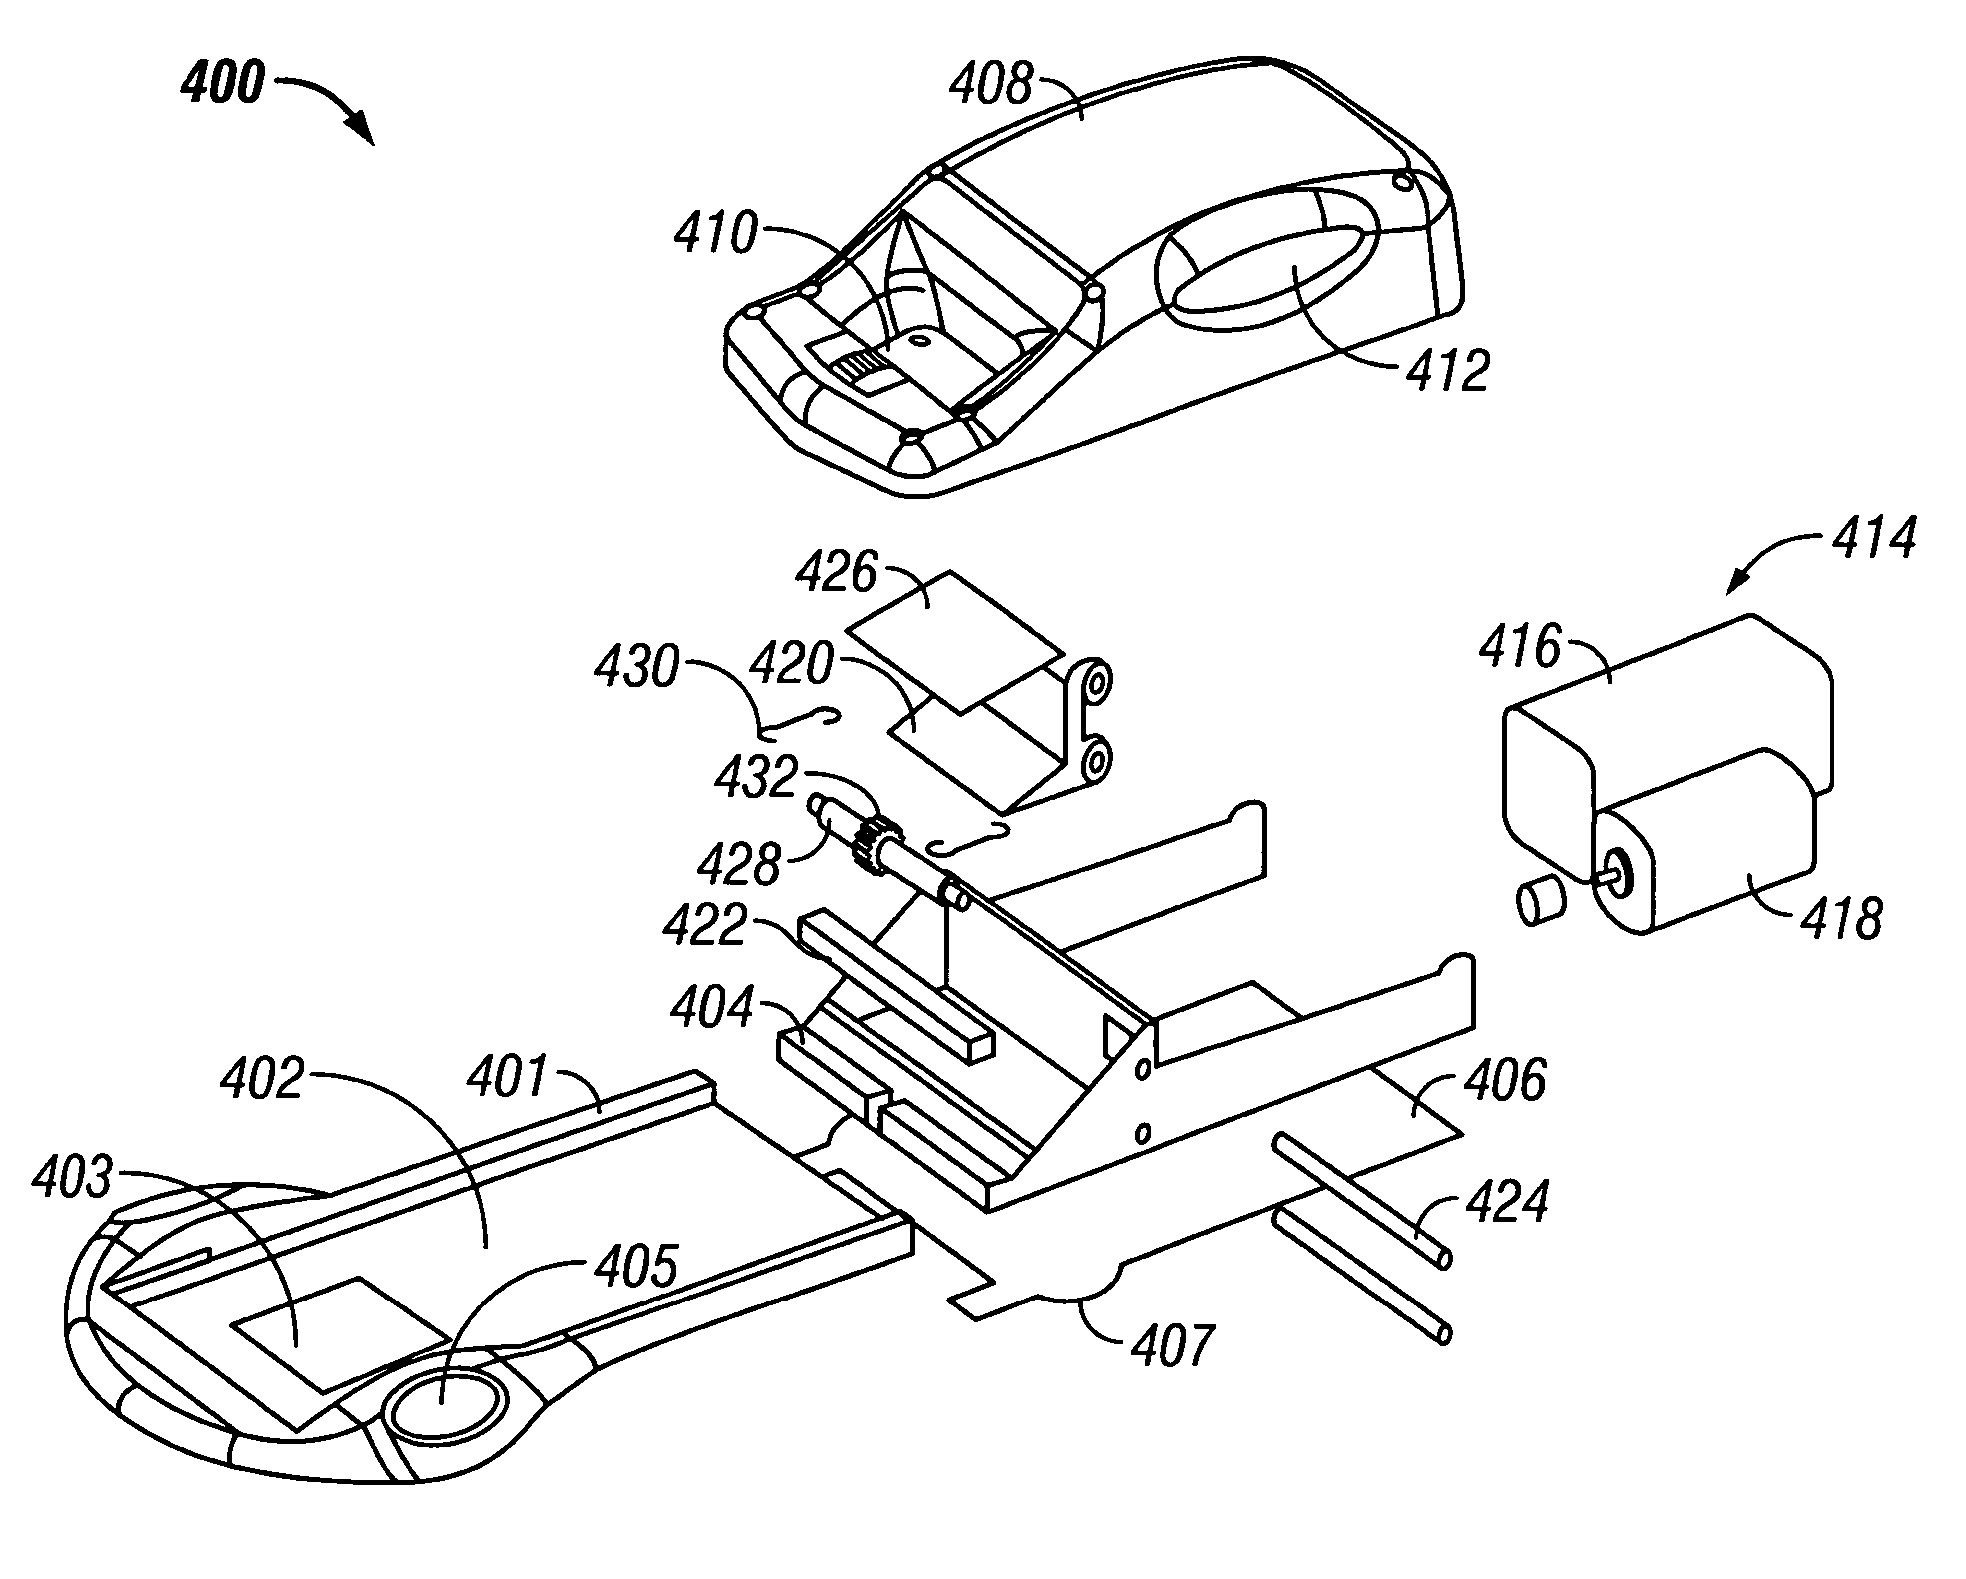 Skin grafting devices and methods